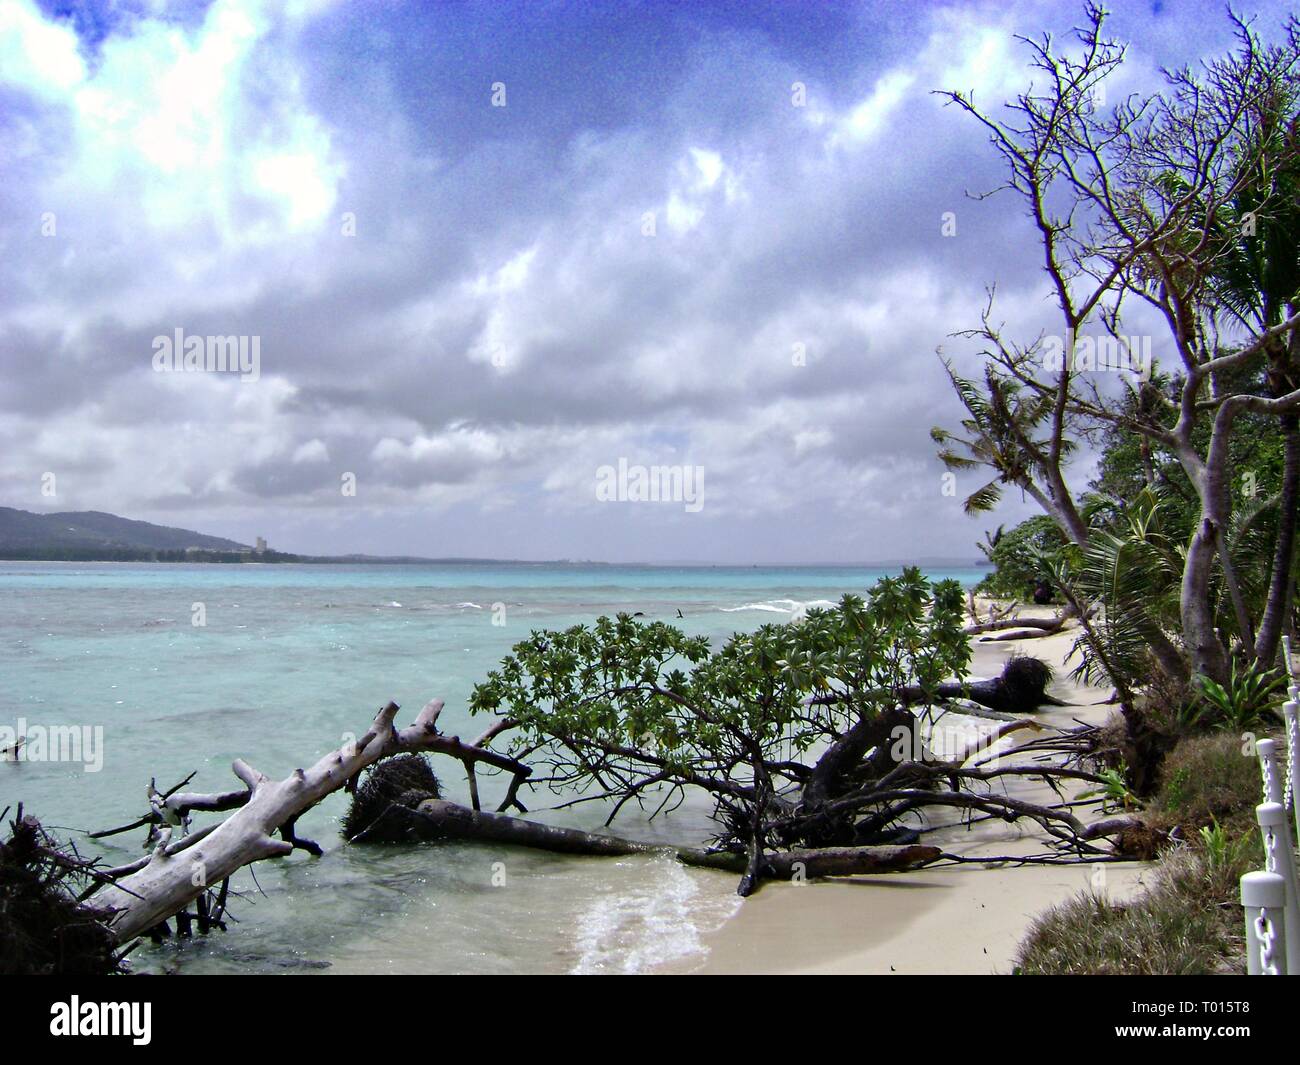 Storms uprooted trees and broke off branches cluttering the beautiful white sand beach of Managaha Island, Saipan Stock Photo